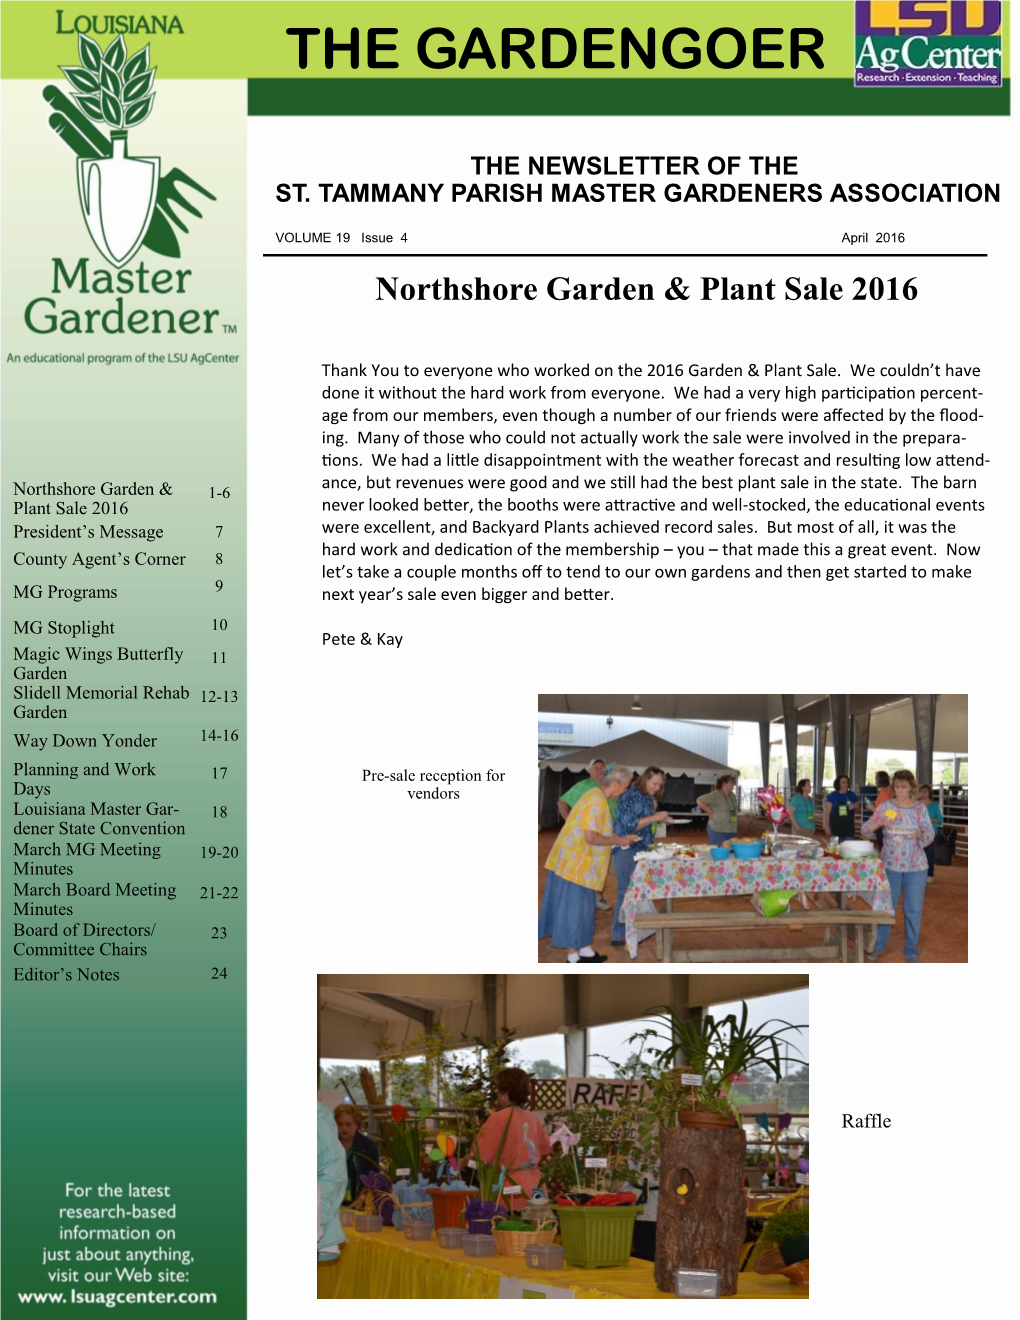 The Gardengoer the Newsletter of the St. Tammany Parish